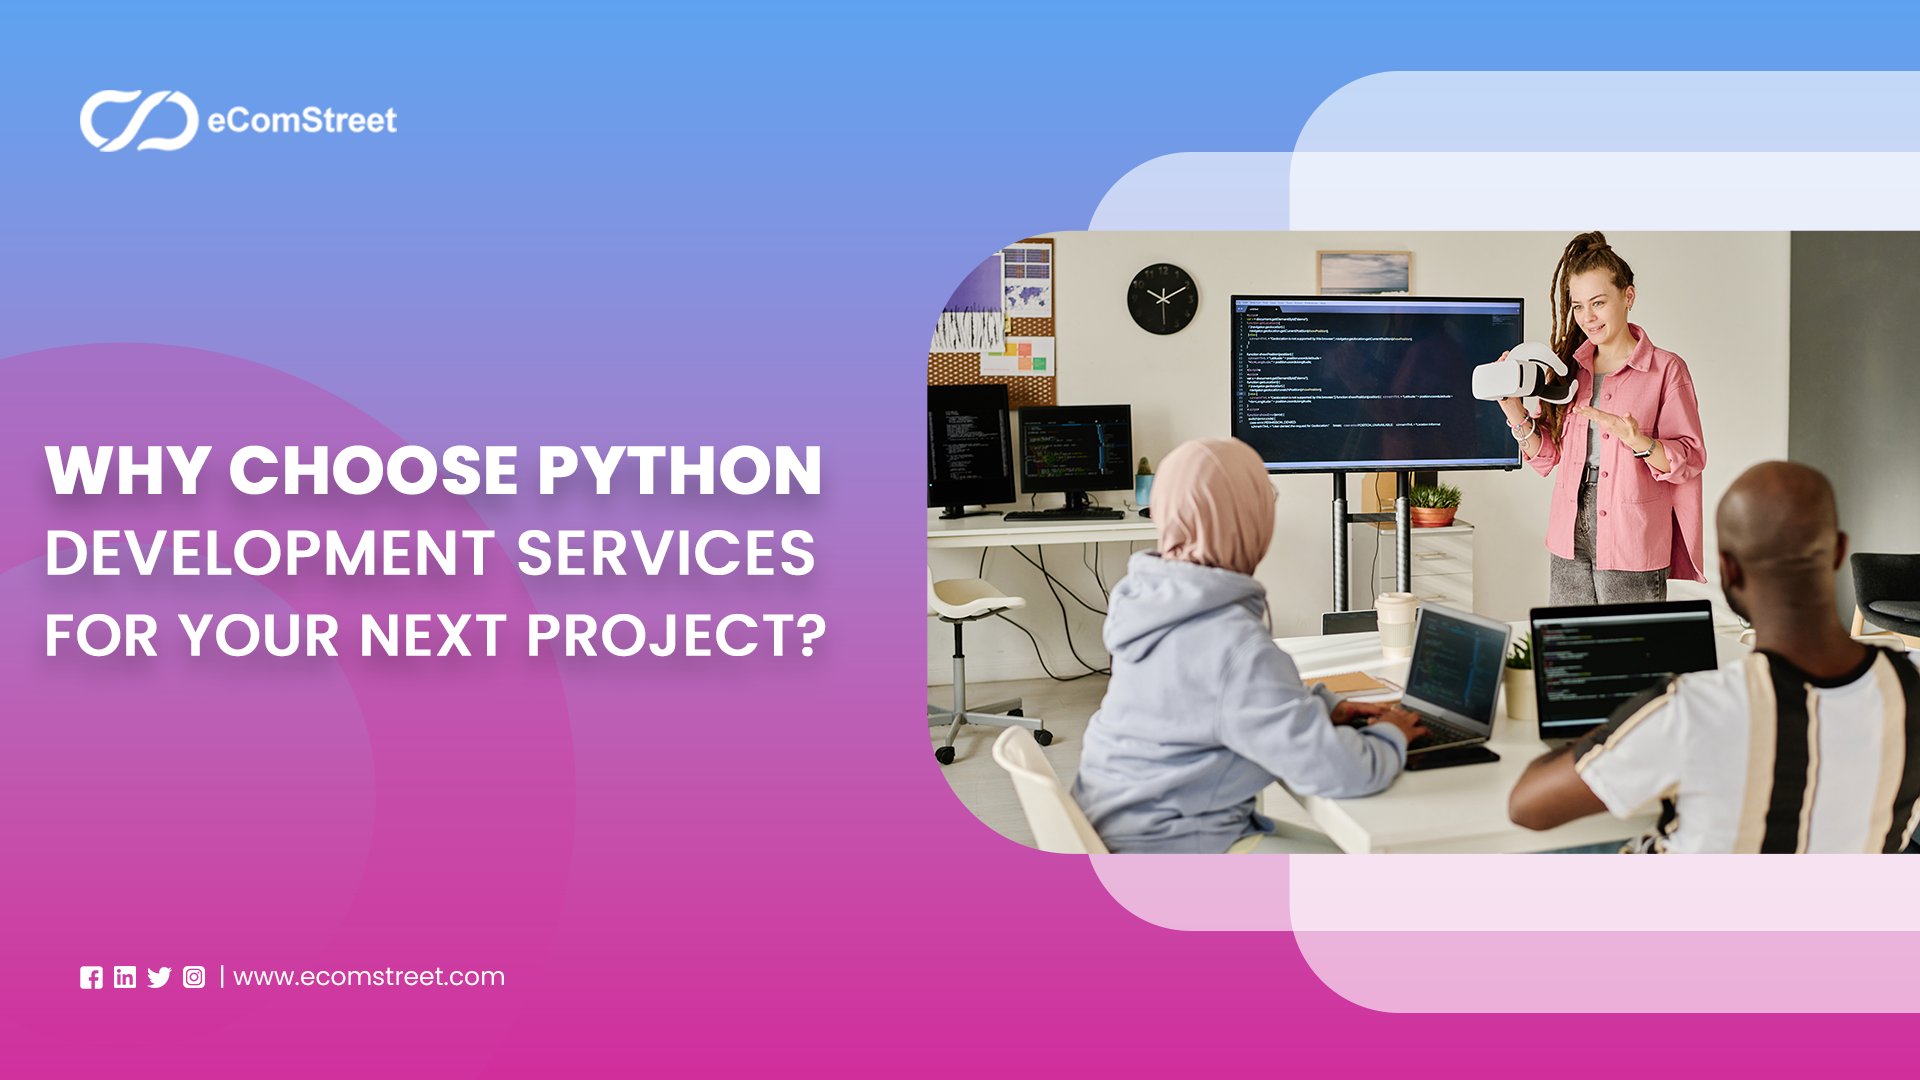 Why Choose Python Development Services for Your Next Project?